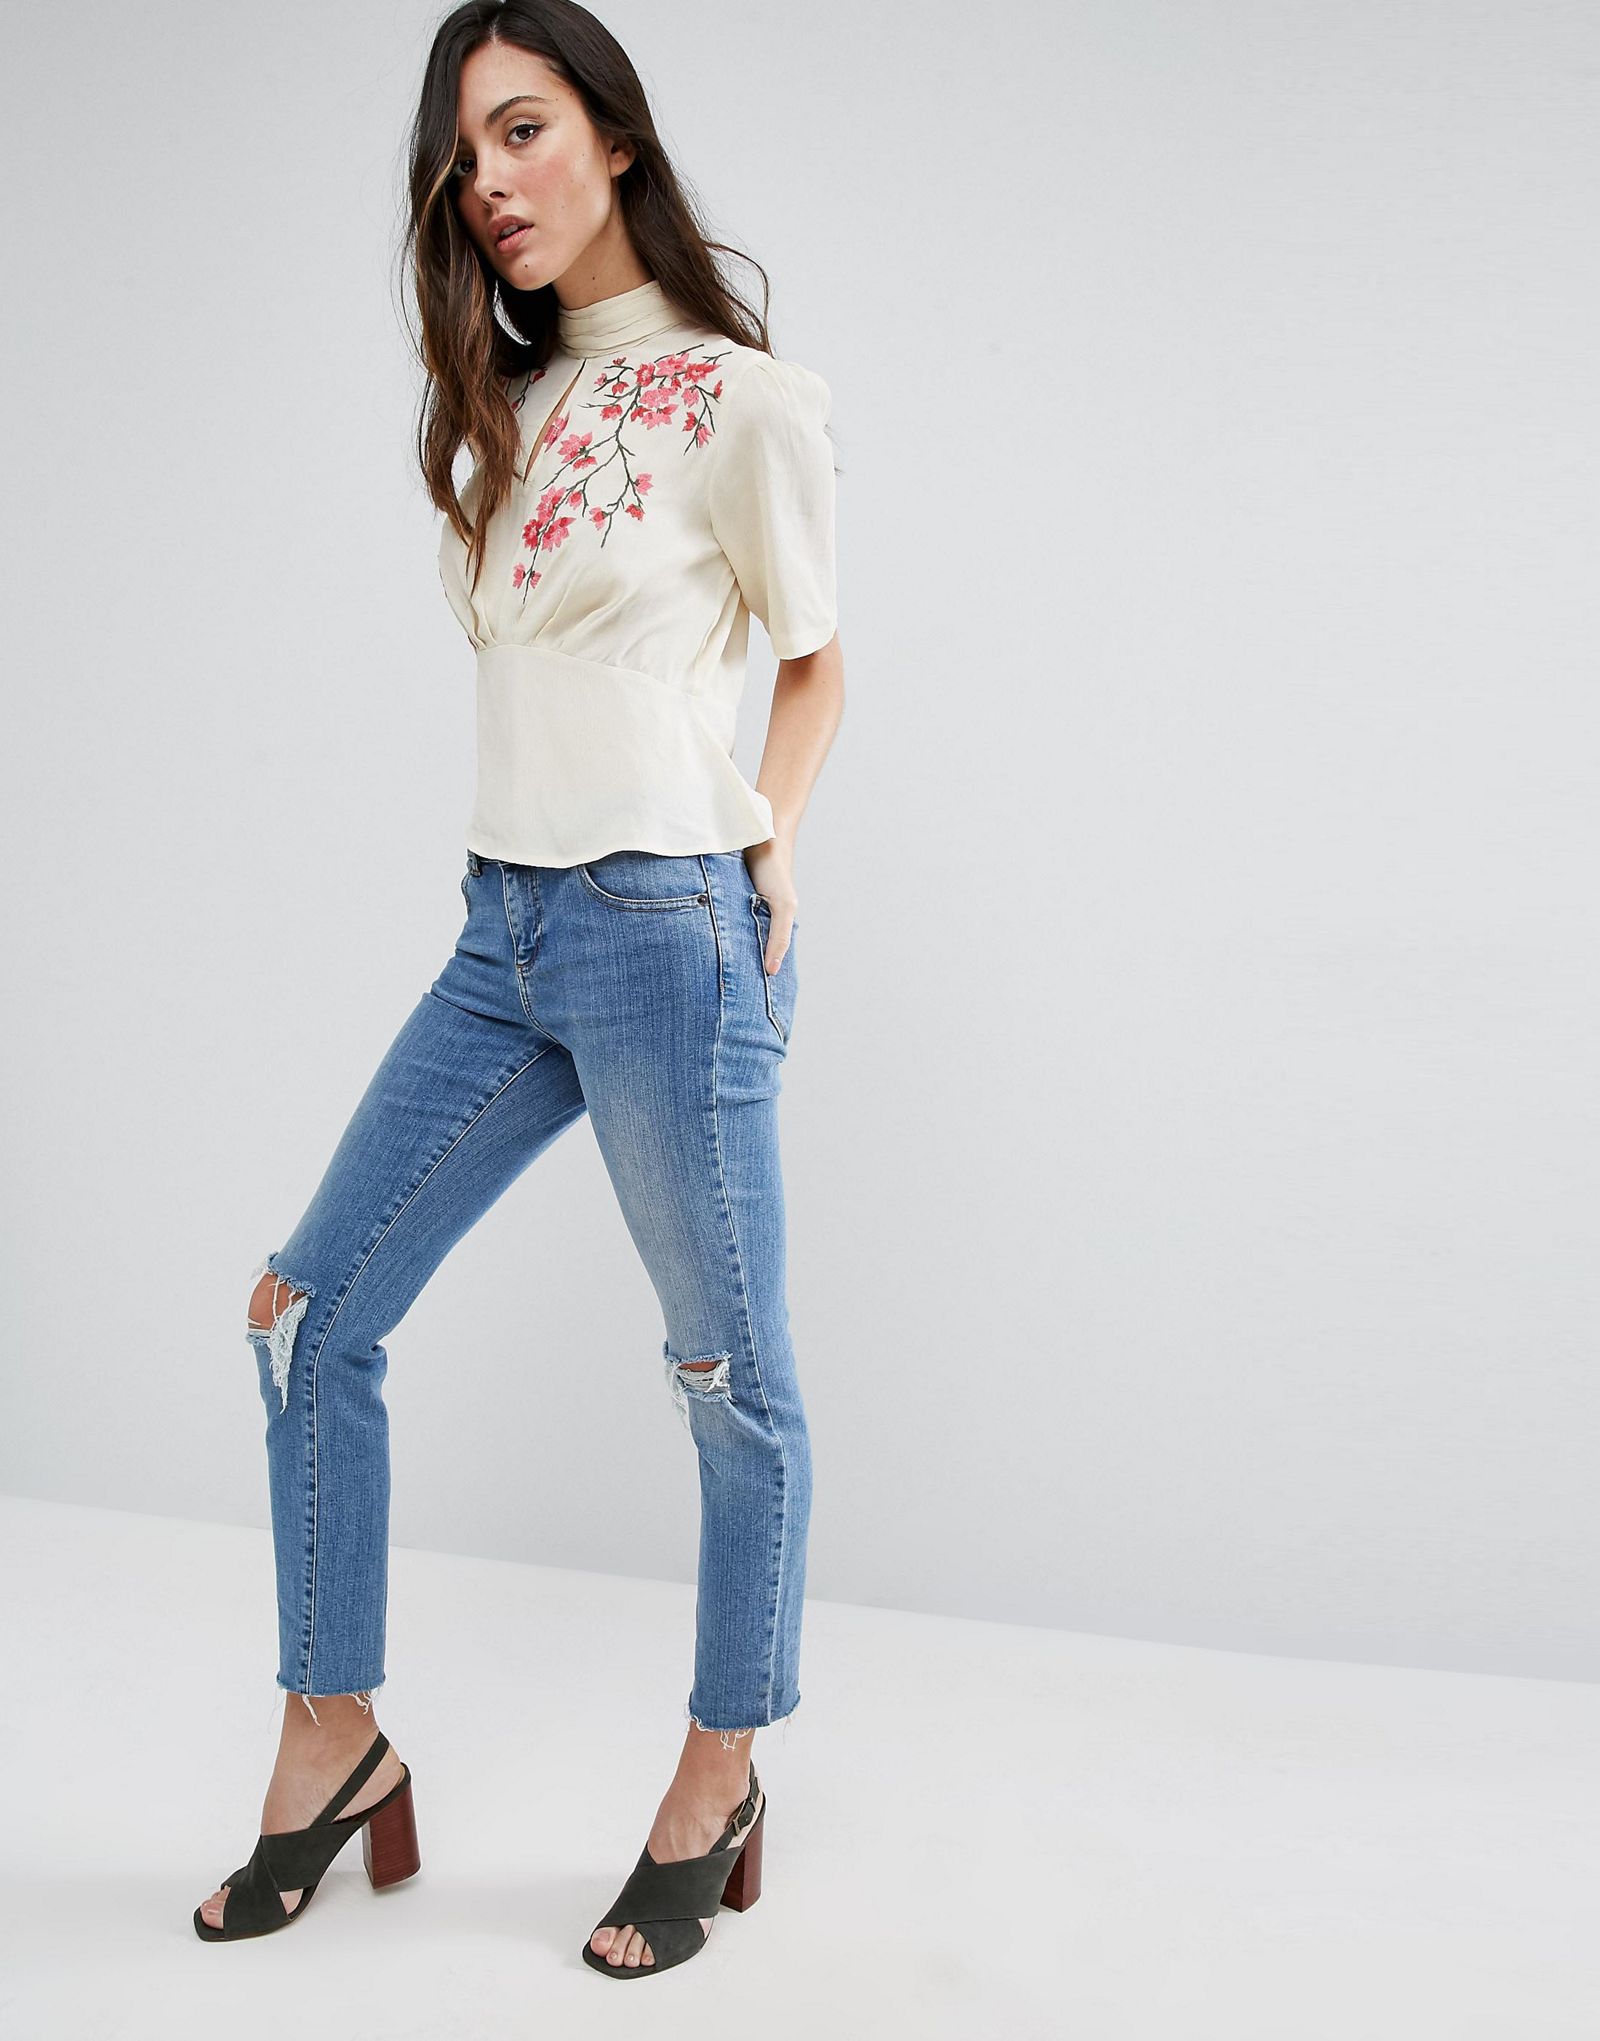 ASOS Tea Blouse With Embroidery